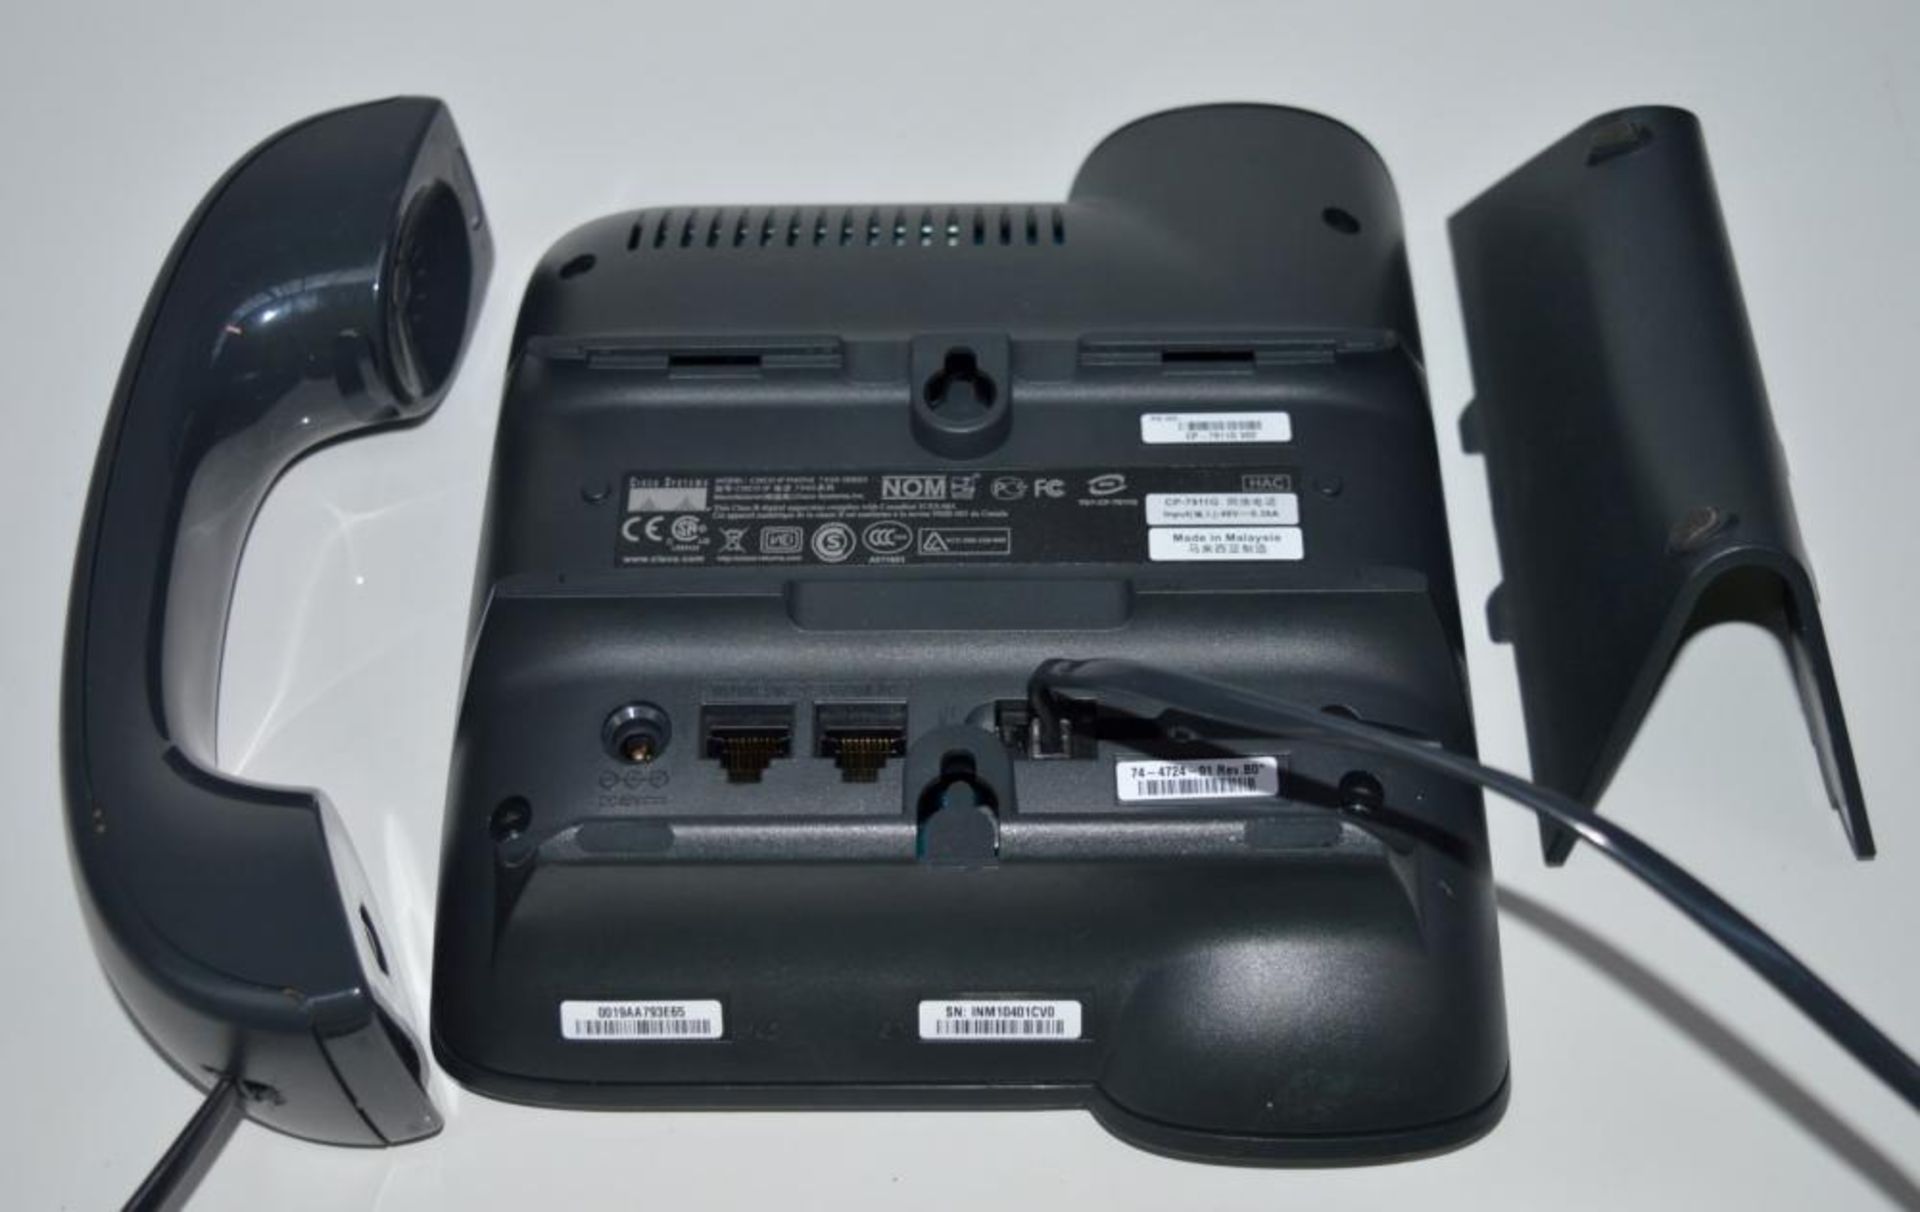 4 x Cisco CP-7911G Unified IP SIP Phones - Removed From a Working Office Environment in Good Conditi - Image 6 of 8